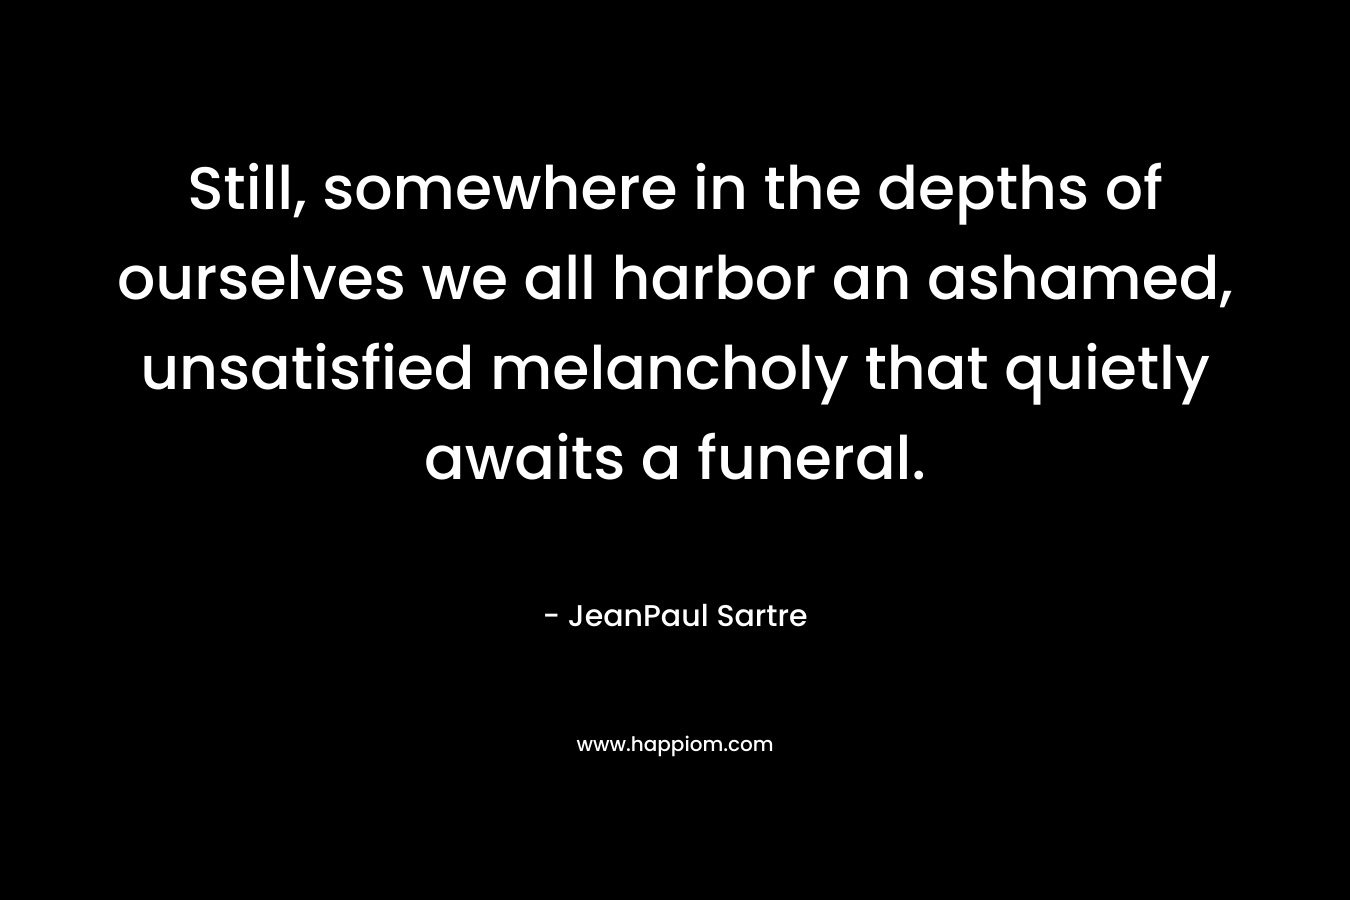 Still, somewhere in the depths of ourselves we all harbor an ashamed, unsatisfied melancholy that quietly awaits a funeral. – JeanPaul Sartre